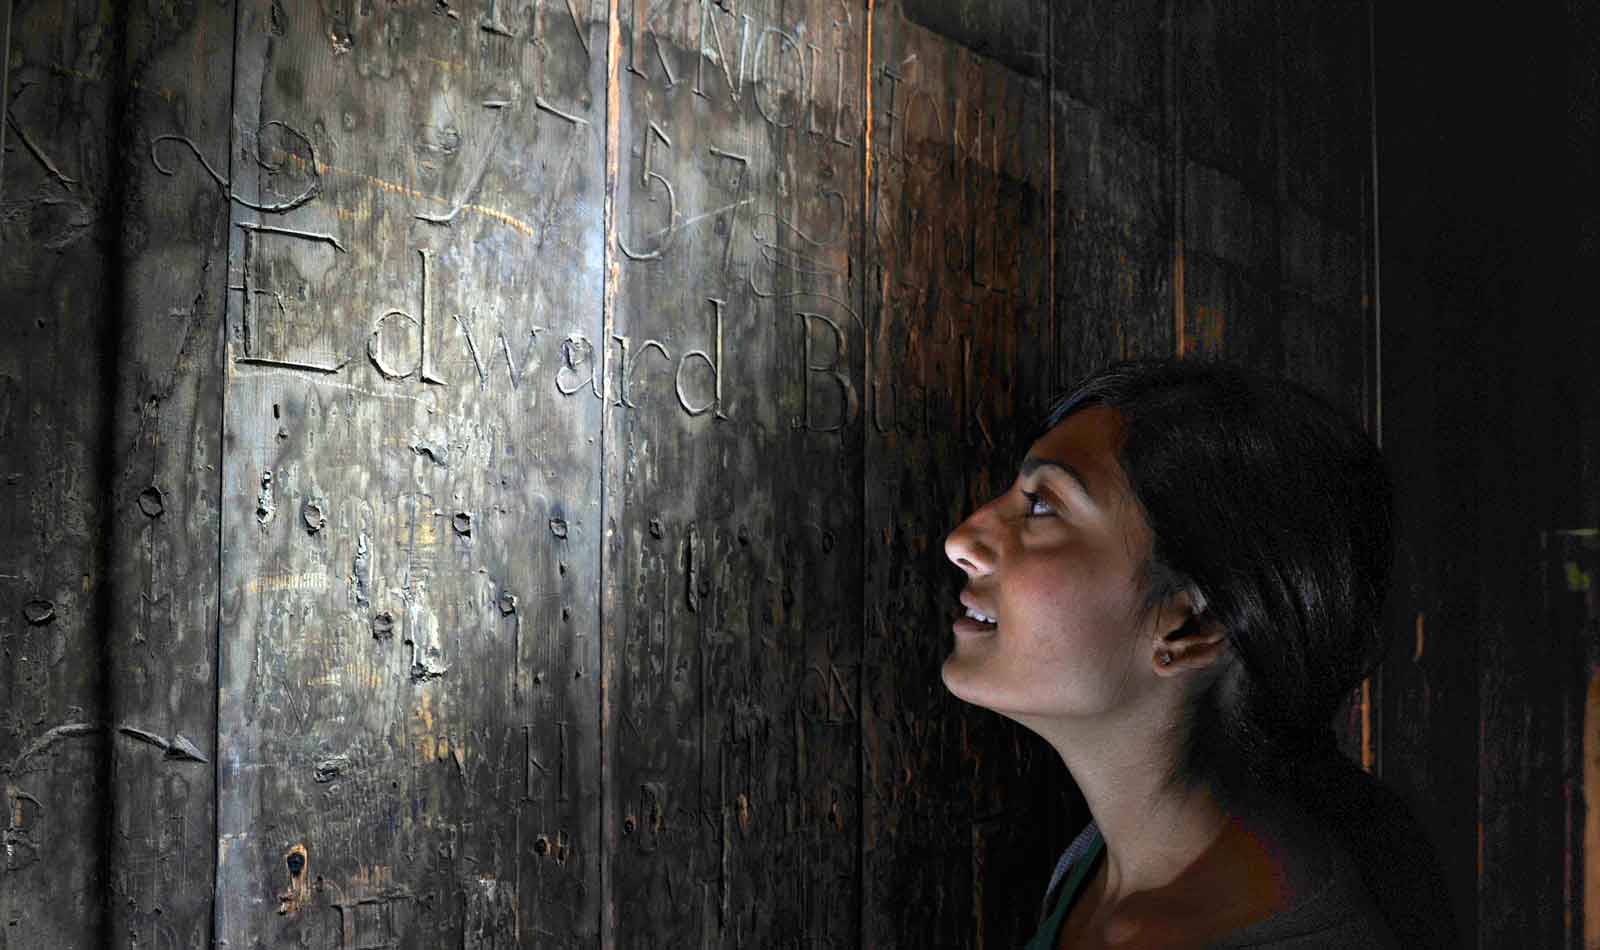 The remarkable wooden walls of the cell reveal the graffiti of the prisoners.